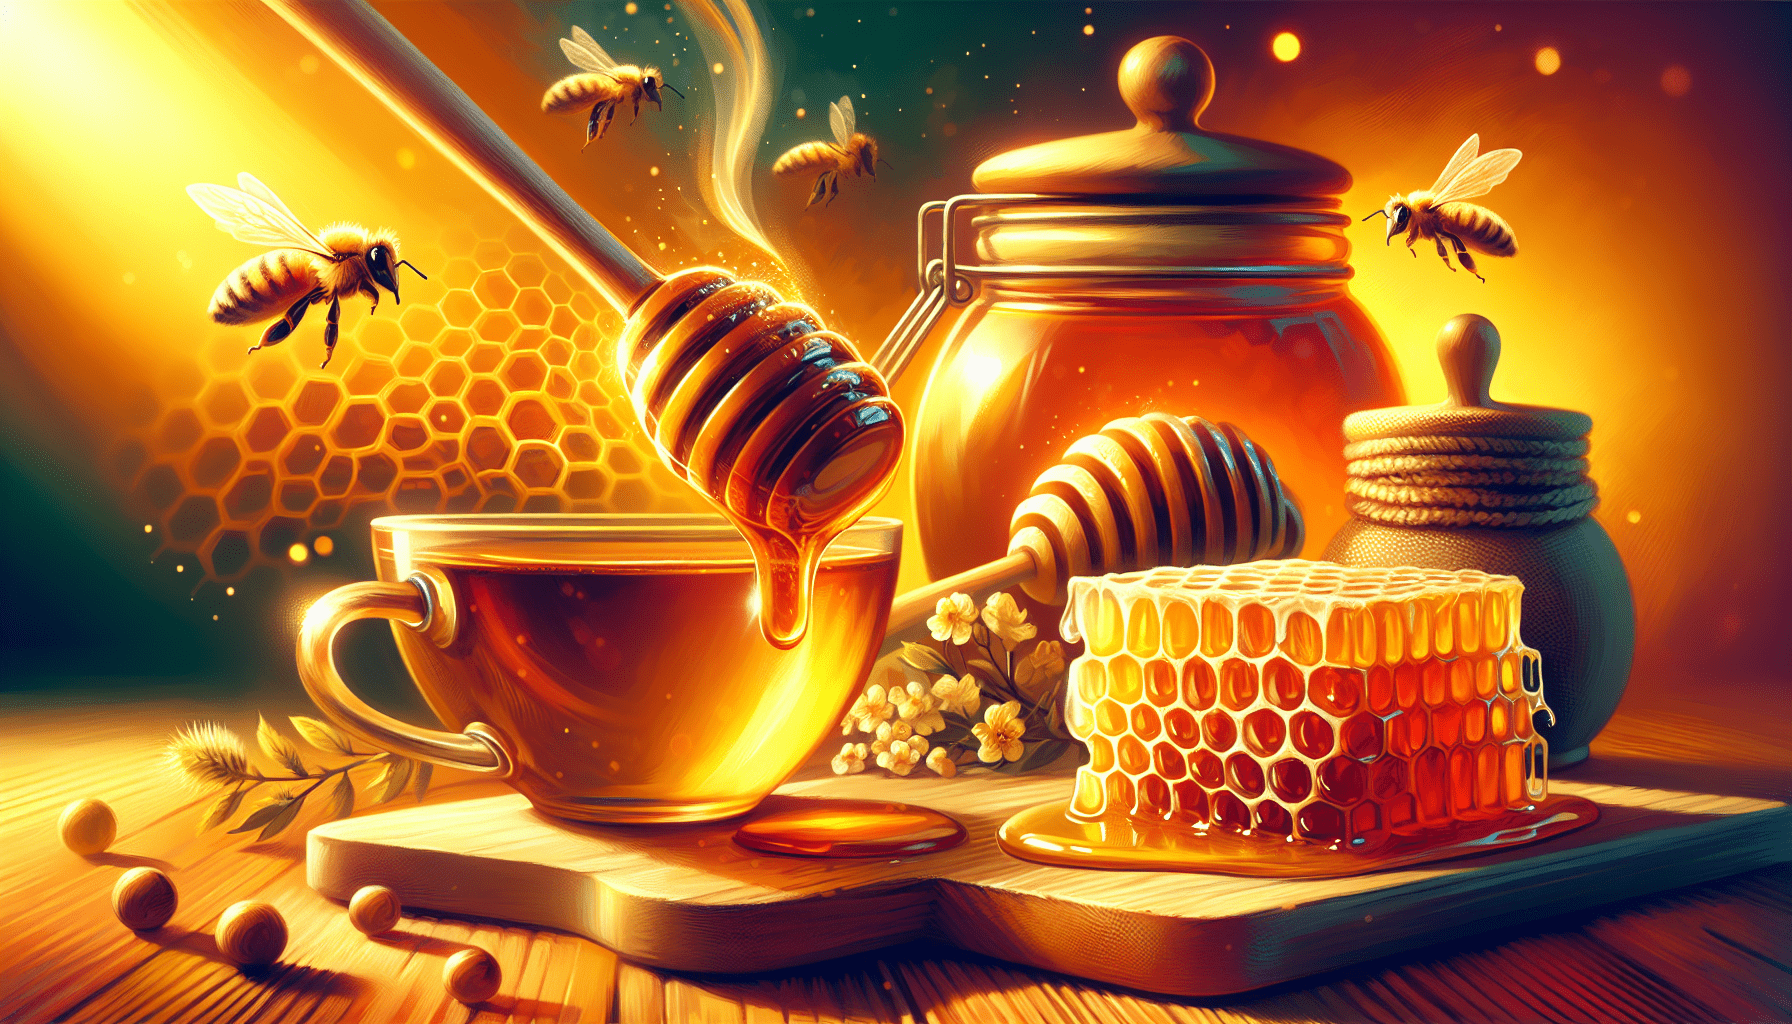 4 are there specific types of honey with enhanced medicinal properties